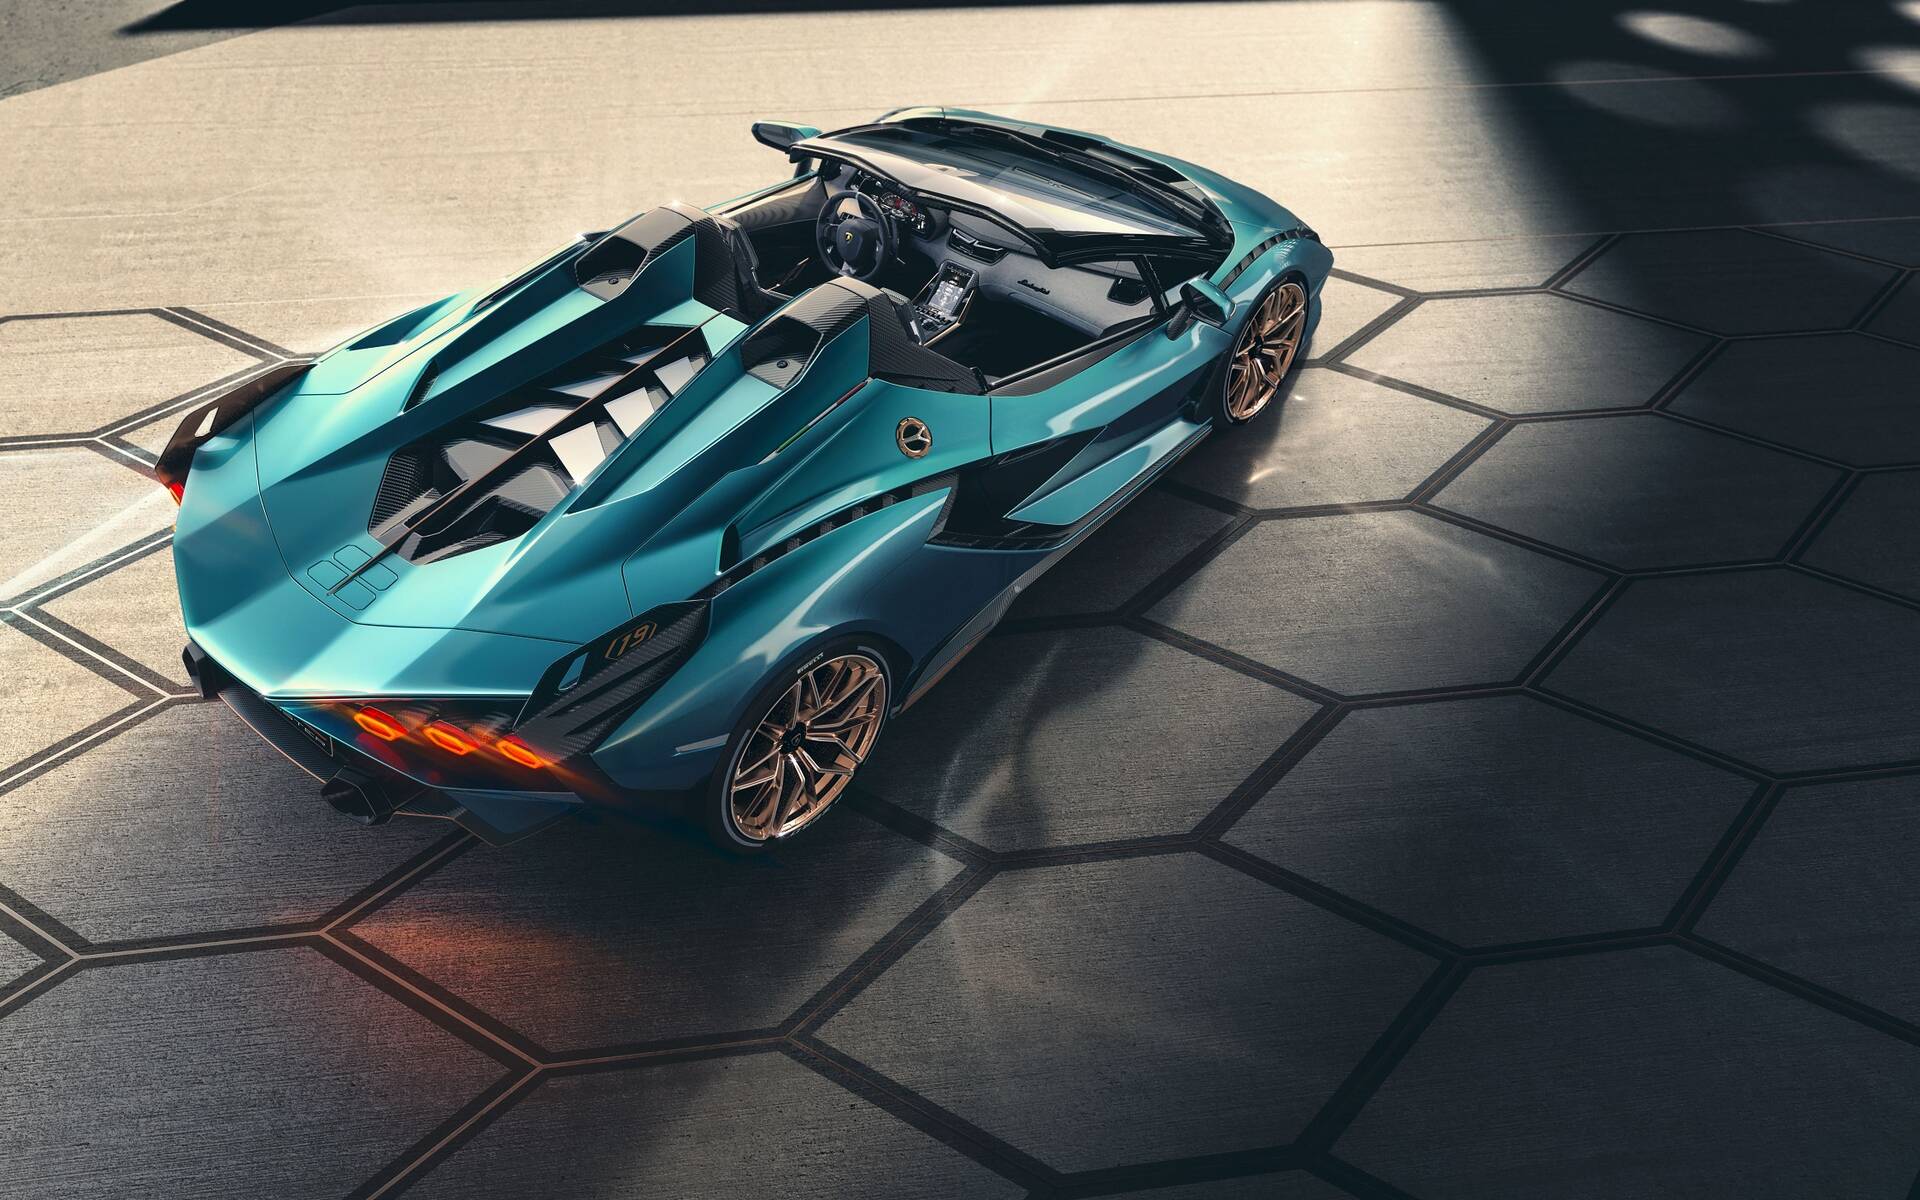 New Lamborghini Sián Roadster unveiled: the future is here